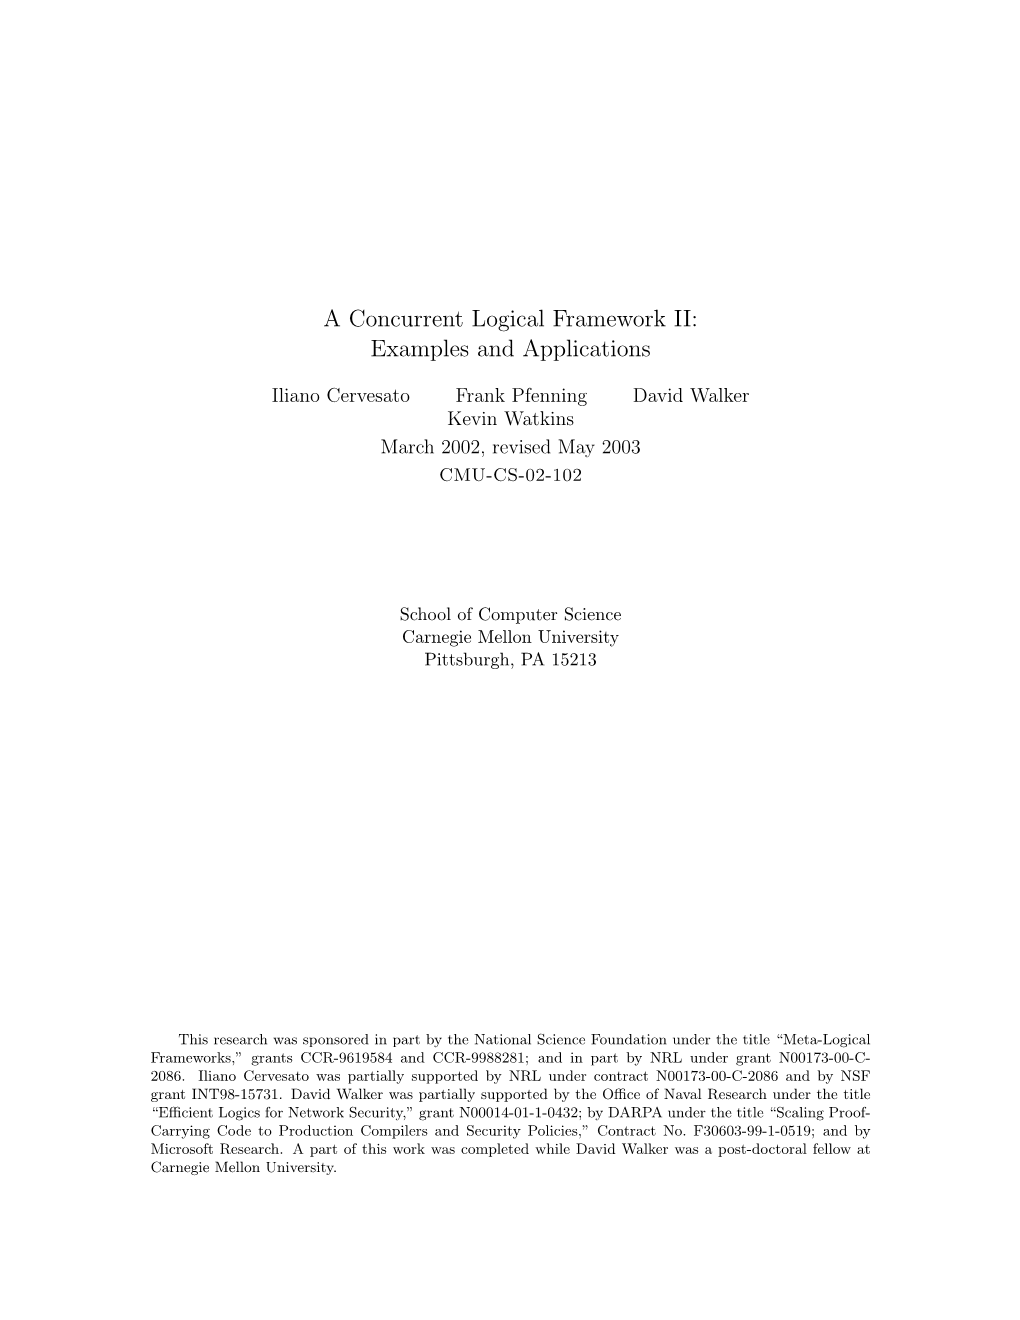 A Concurrent Logical Framework II: Examples and Applications